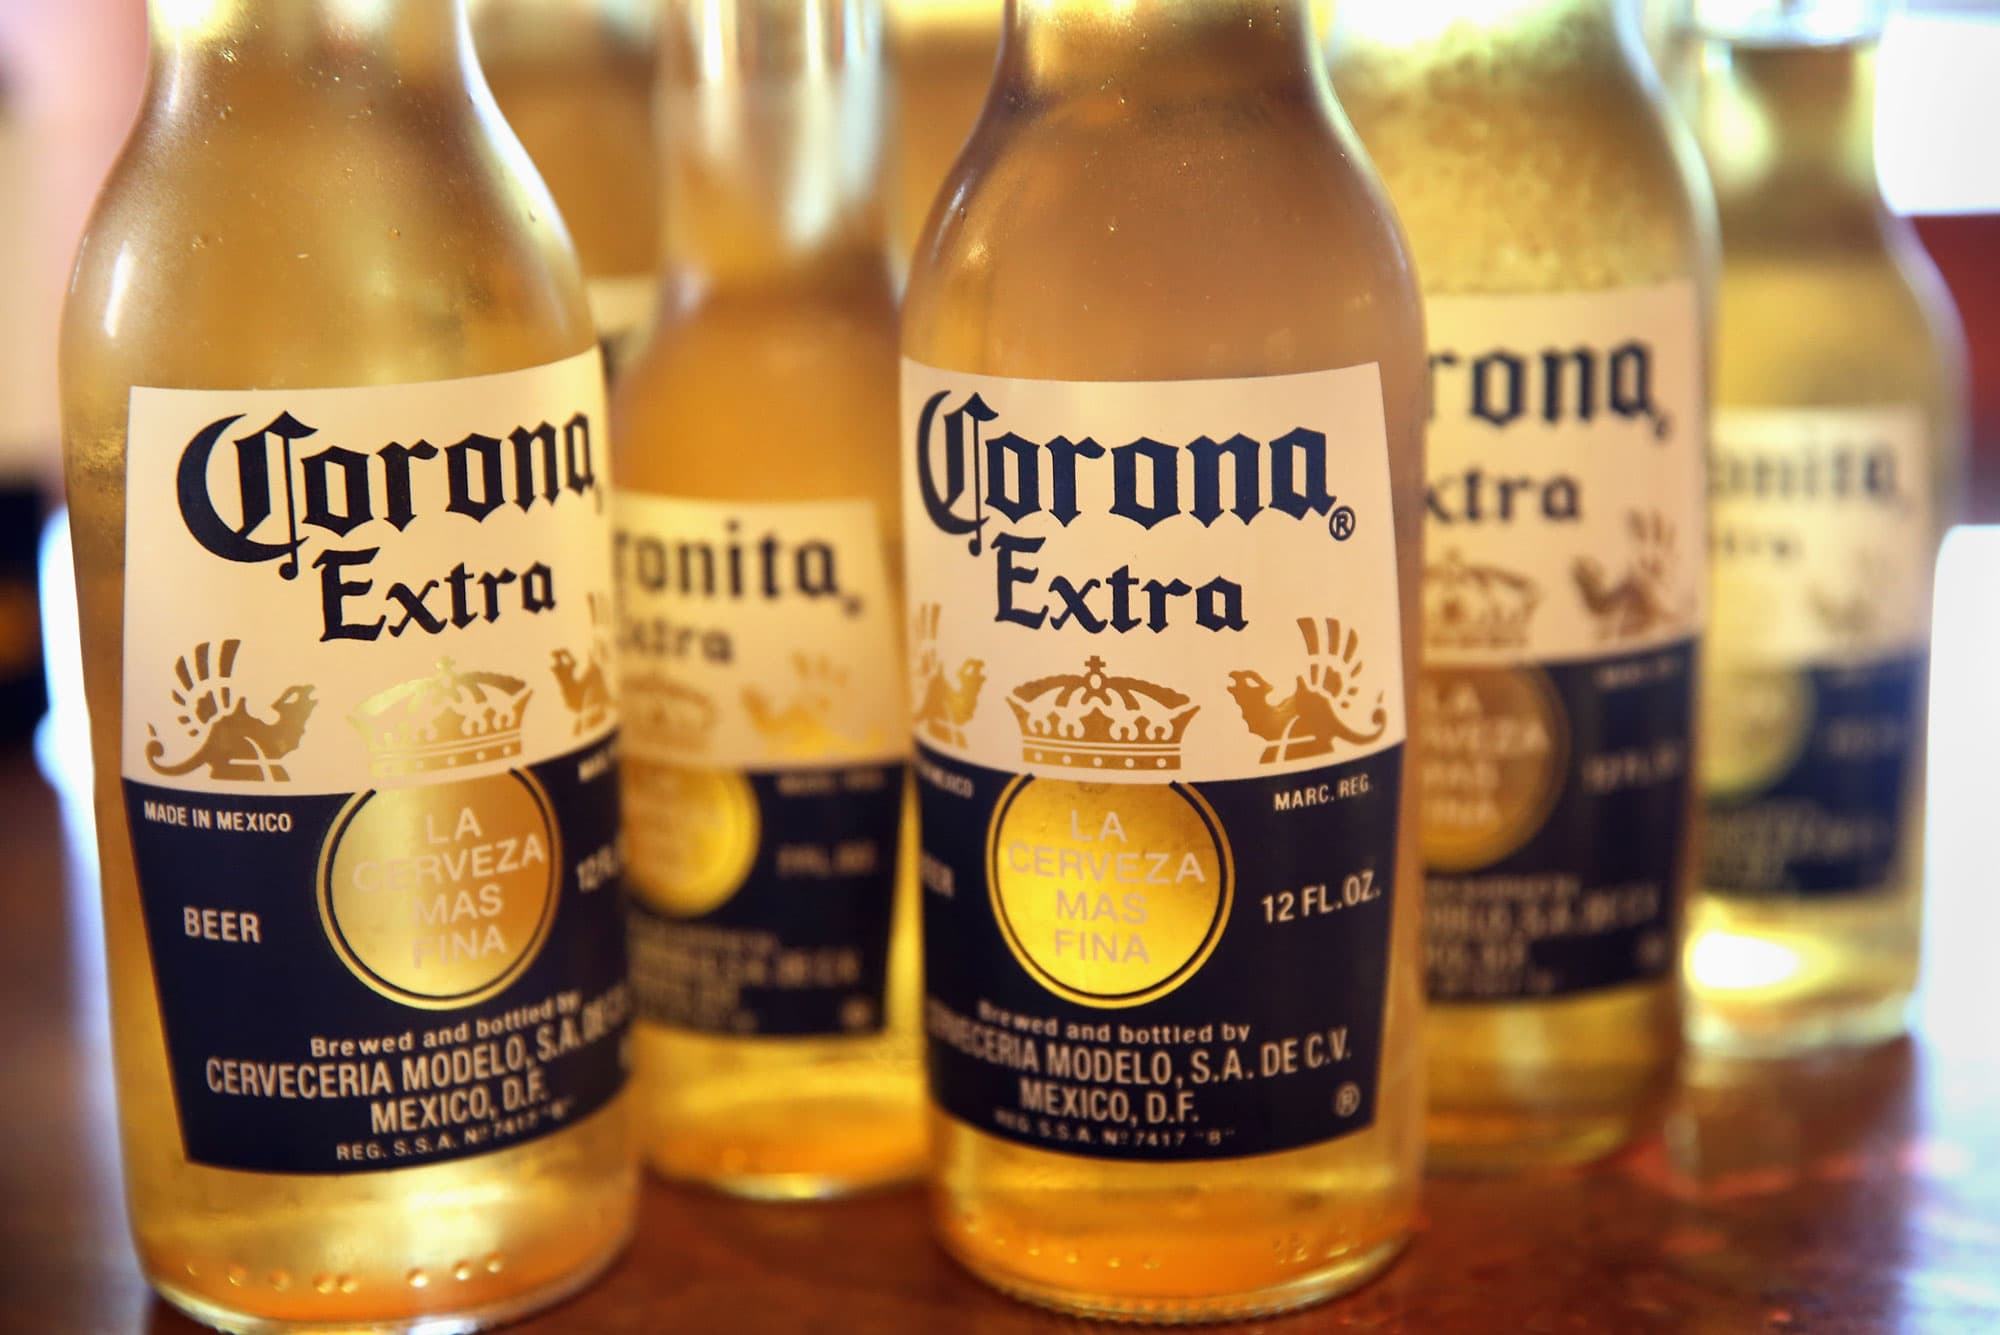 Corona's beer company, Constellation Brands, is taking actions aimed at enhancing shareholder value and pops